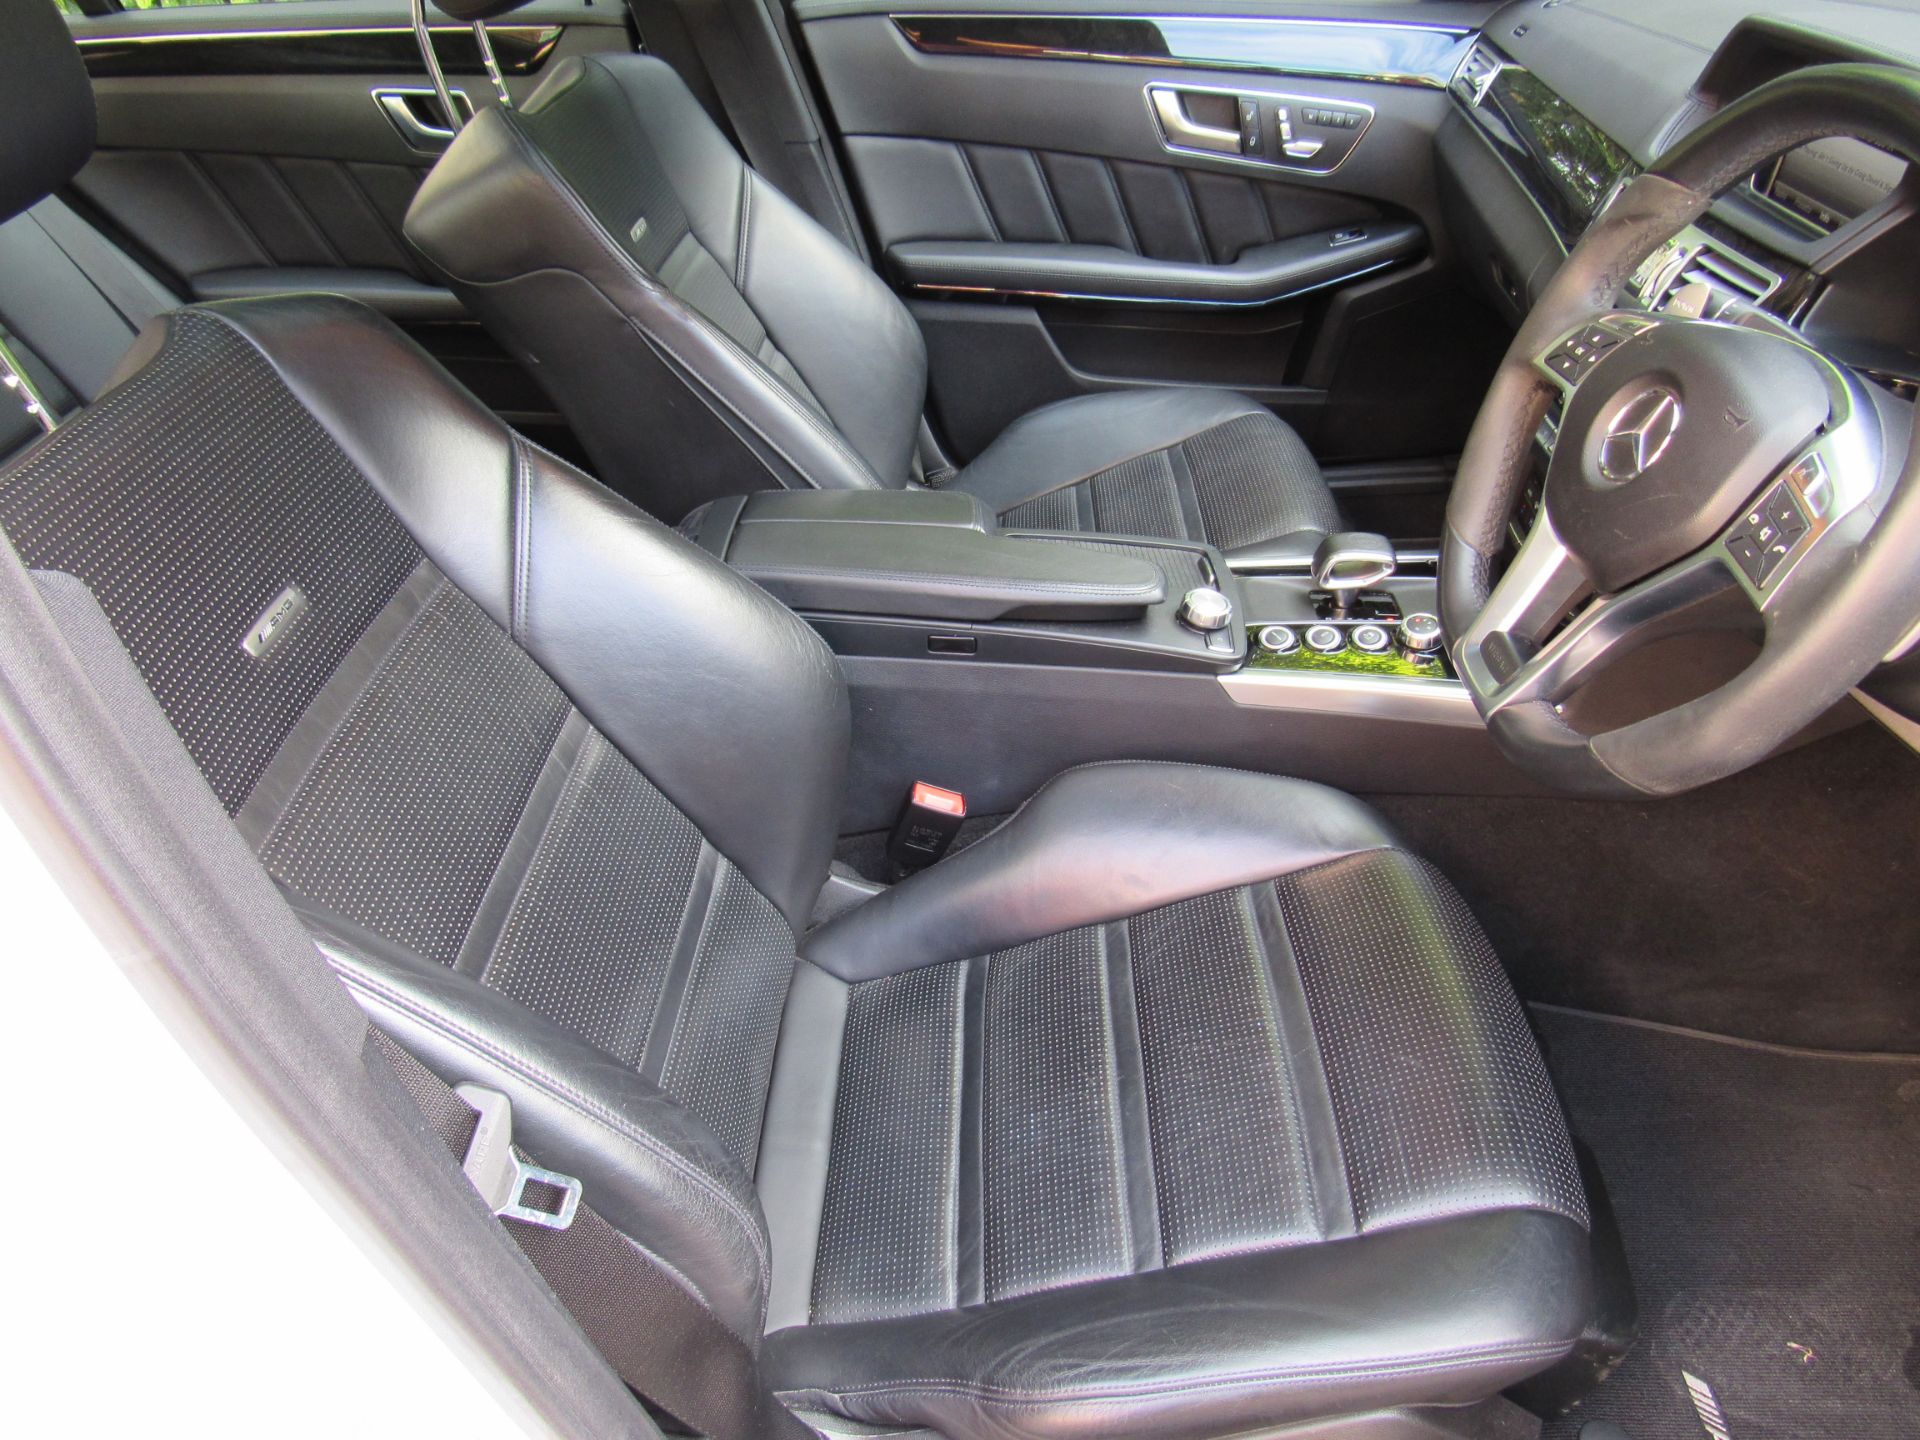 Mercedes-Benz E63 AMG Saloon - Registered 2013 - 33000 miles - This care has full panoramic sunroof, - Image 12 of 15